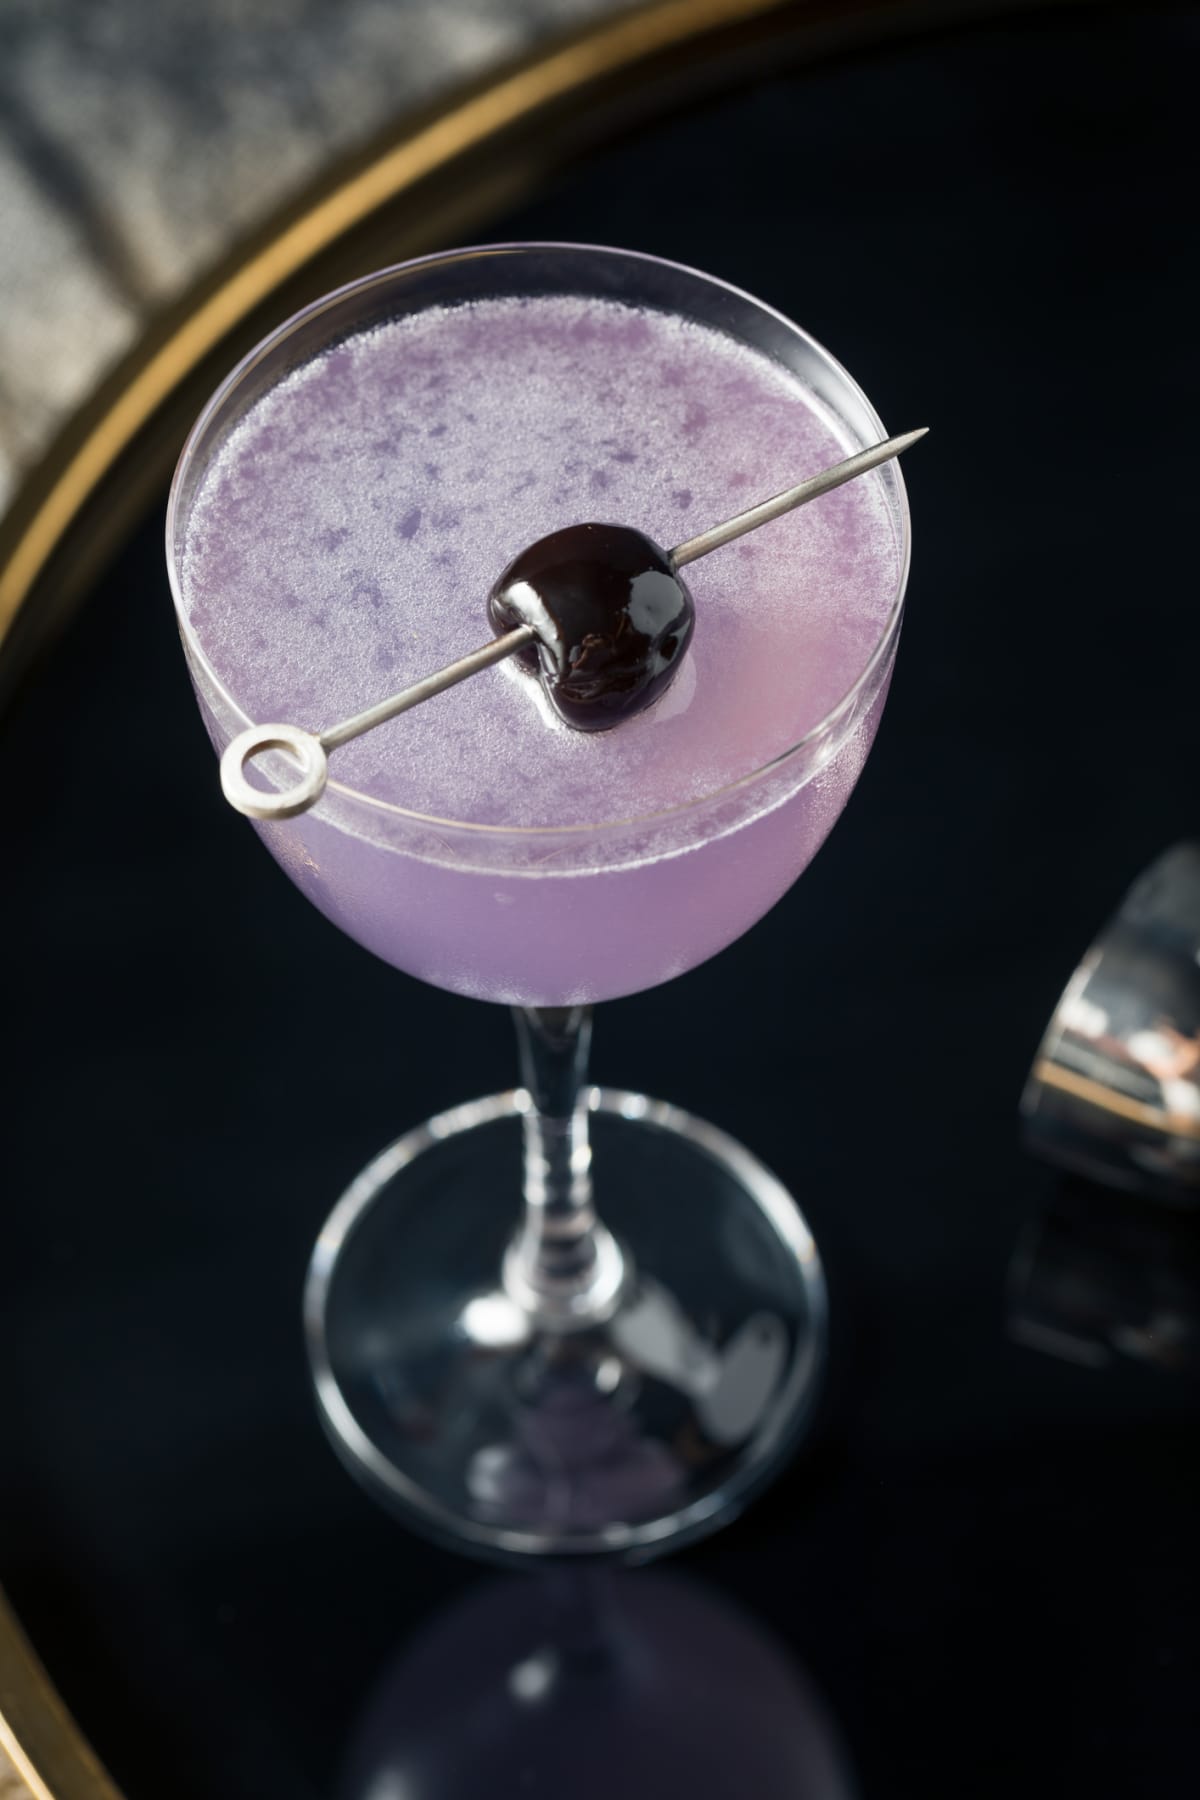 Boozy Refreshing Aviation Cocktail with Gin and Violette Liquor